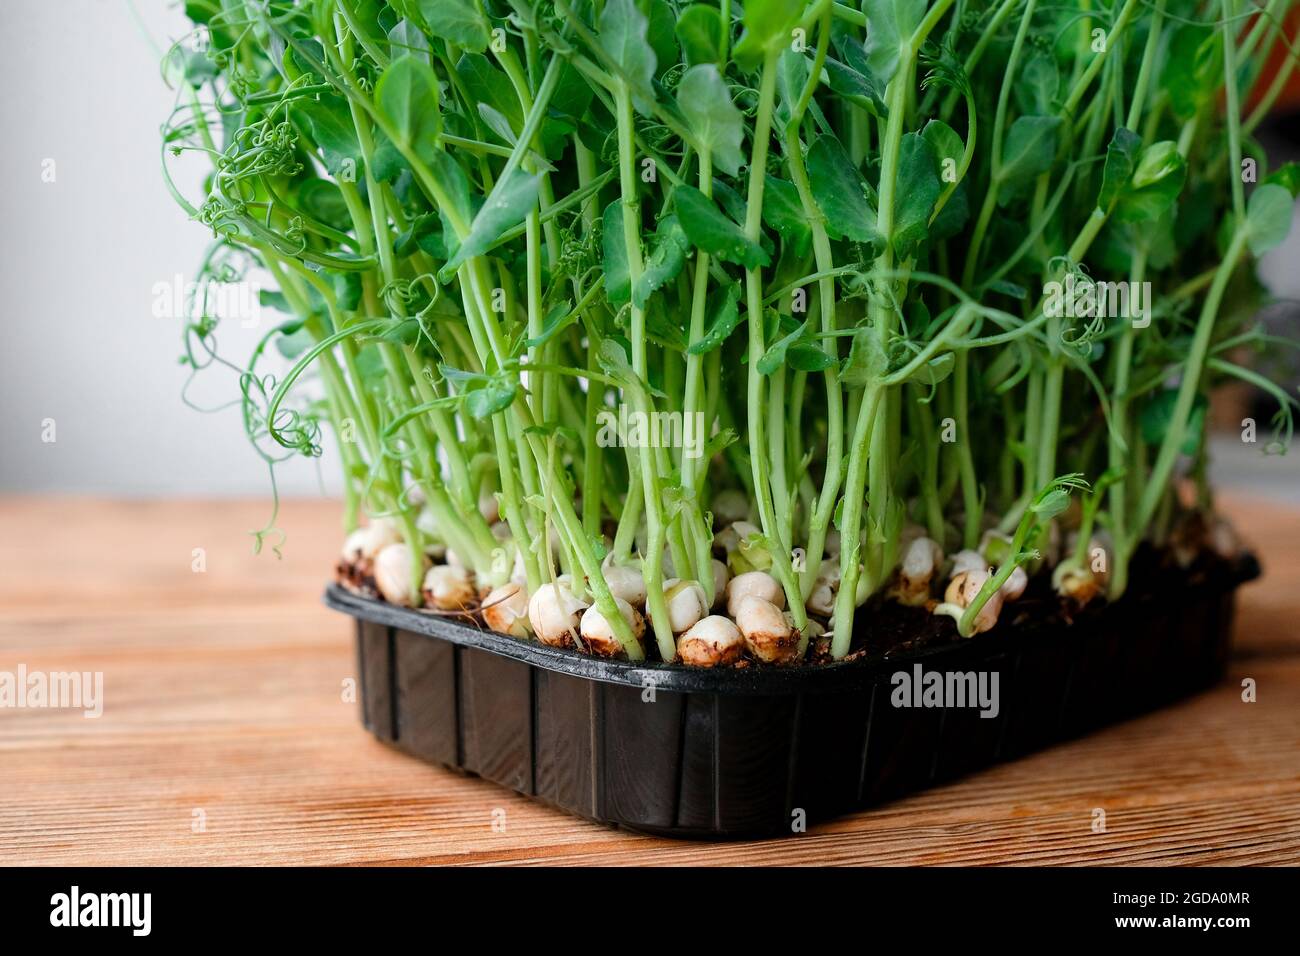 Young sprouts of peas in a container. Ready microgreens. Stock Photo